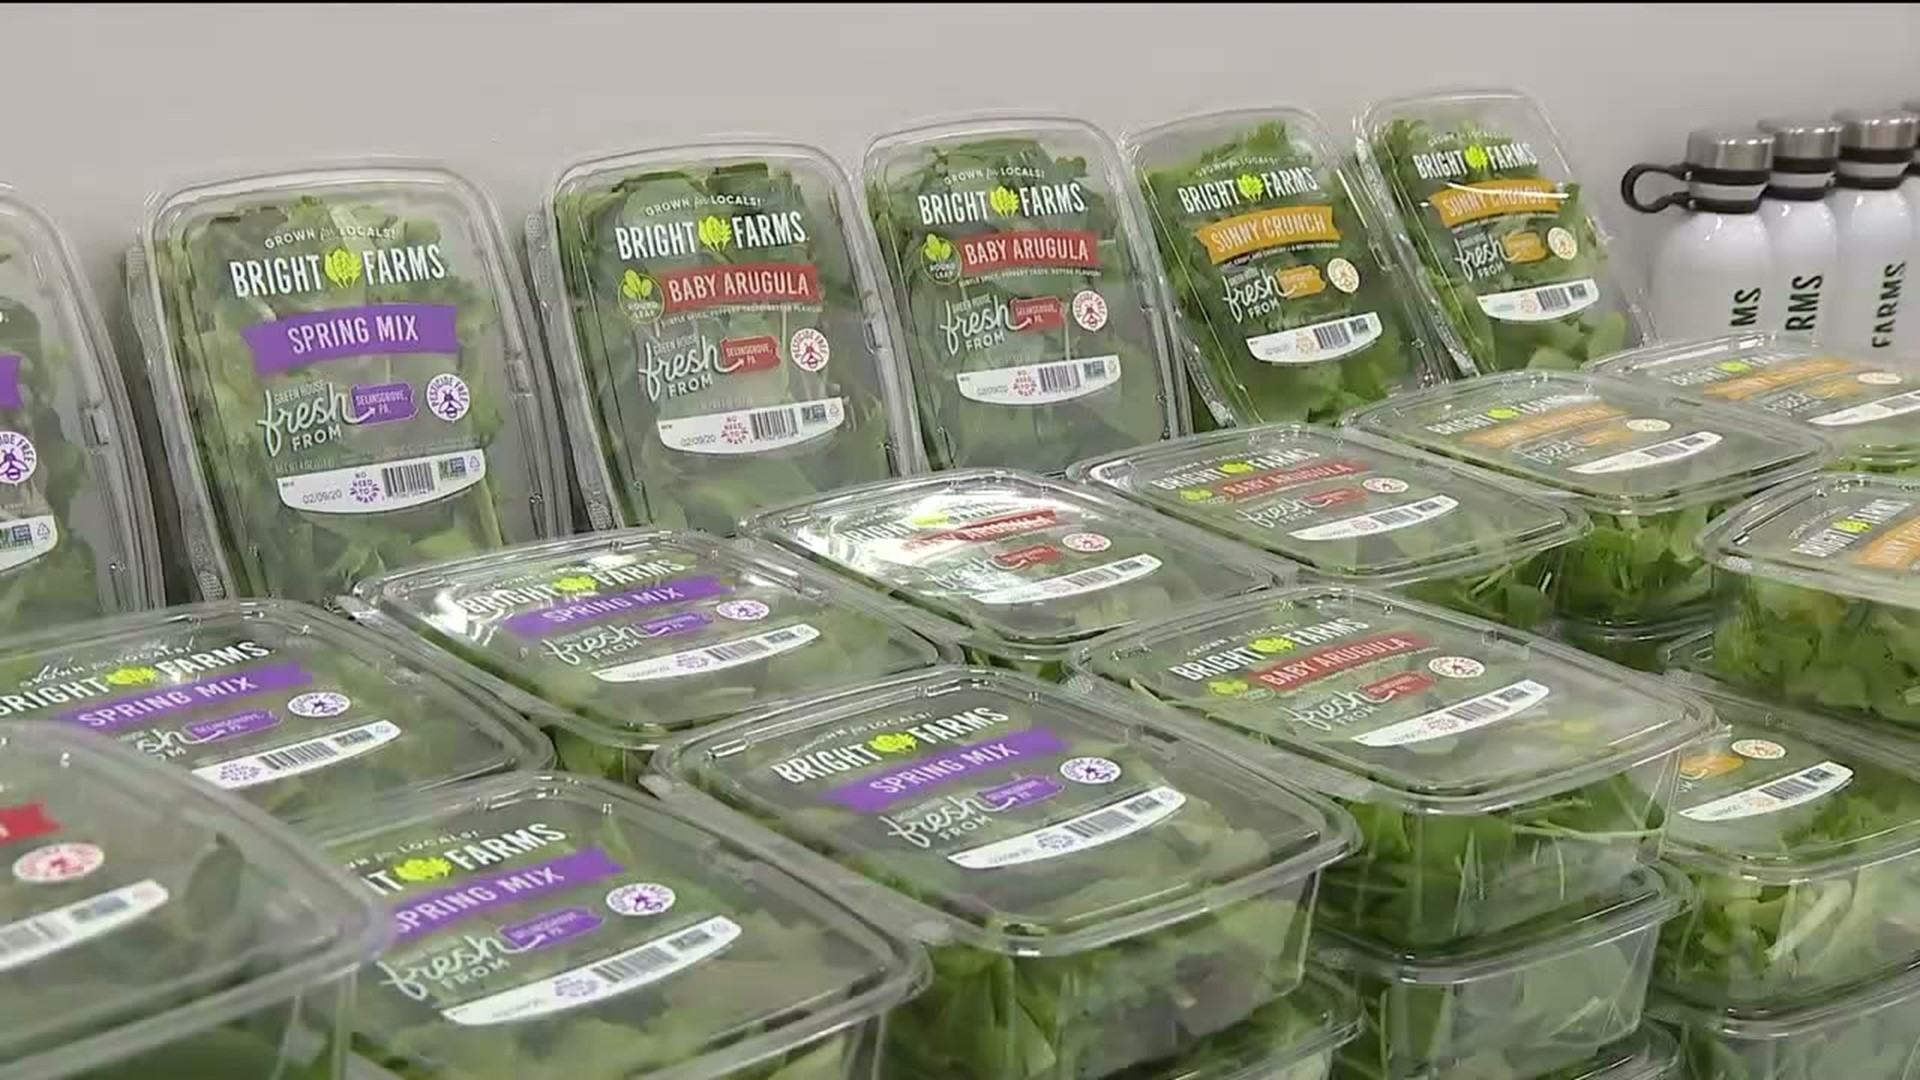 BrightFarms is giving away free salad to health care workers and first responders.